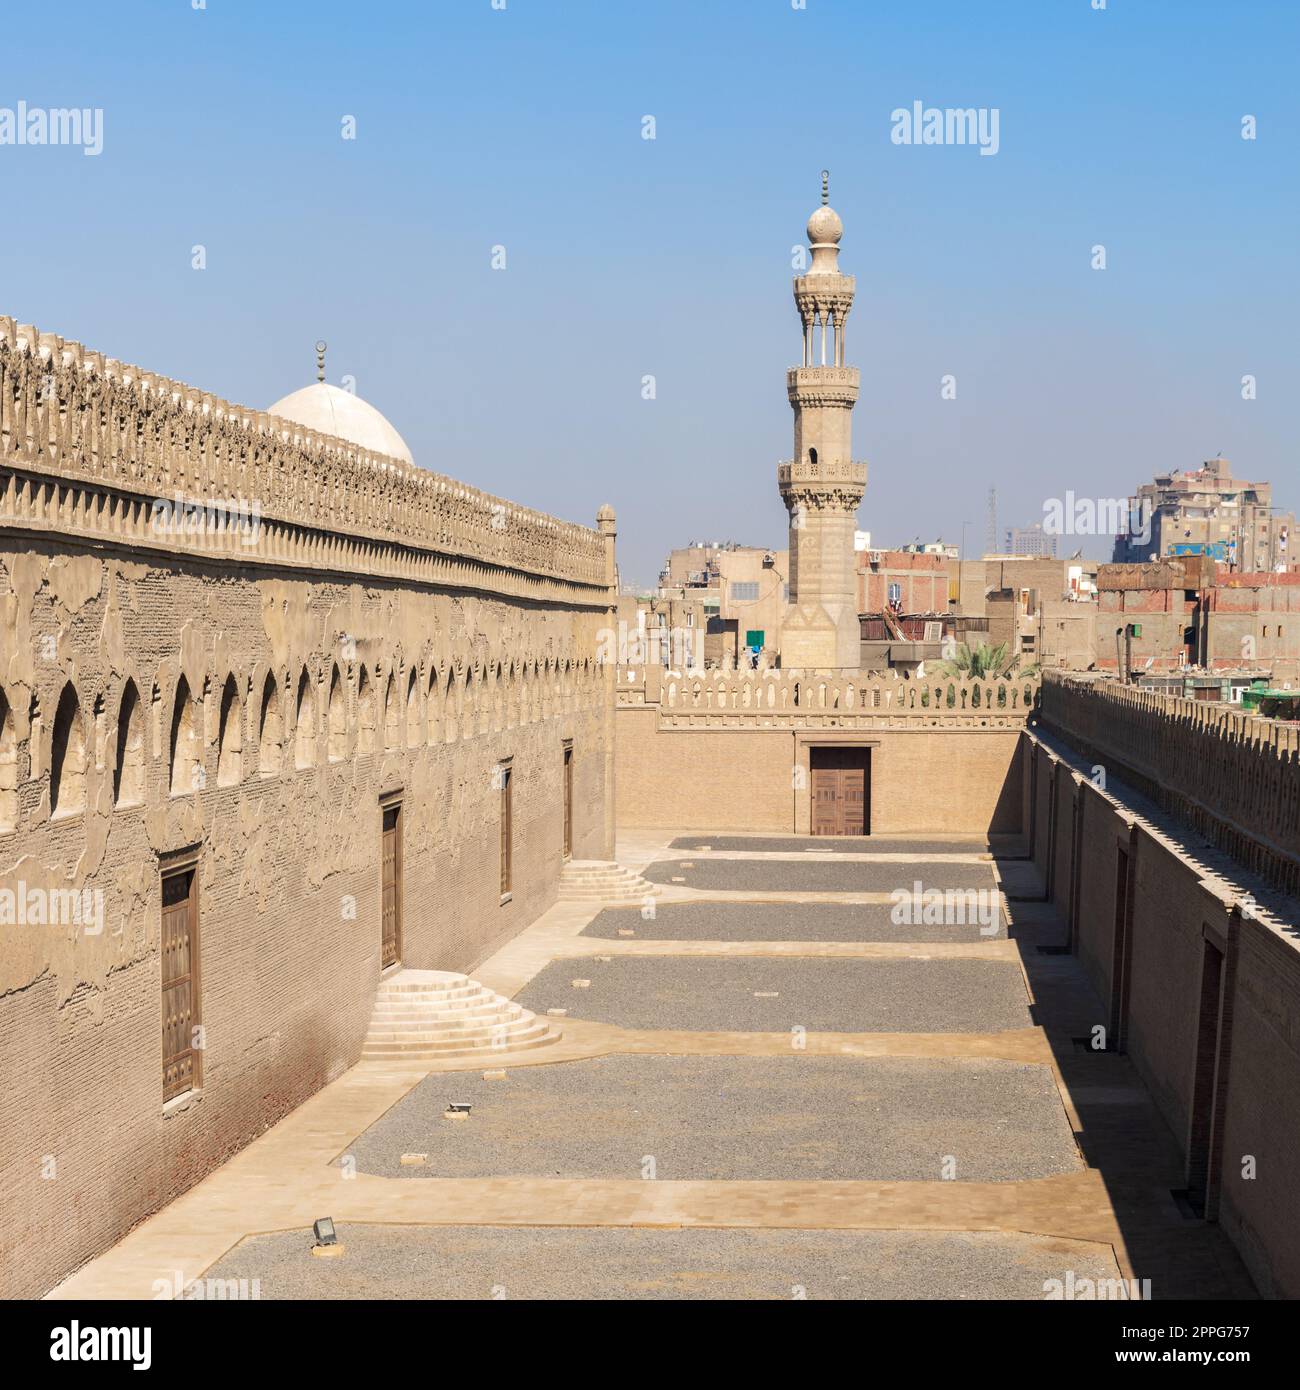 Passages outside Ibn Tulun mosque with the minaret of Amir Sarghatmish mosque at far distance, Cairo, Egypt Stock Photo